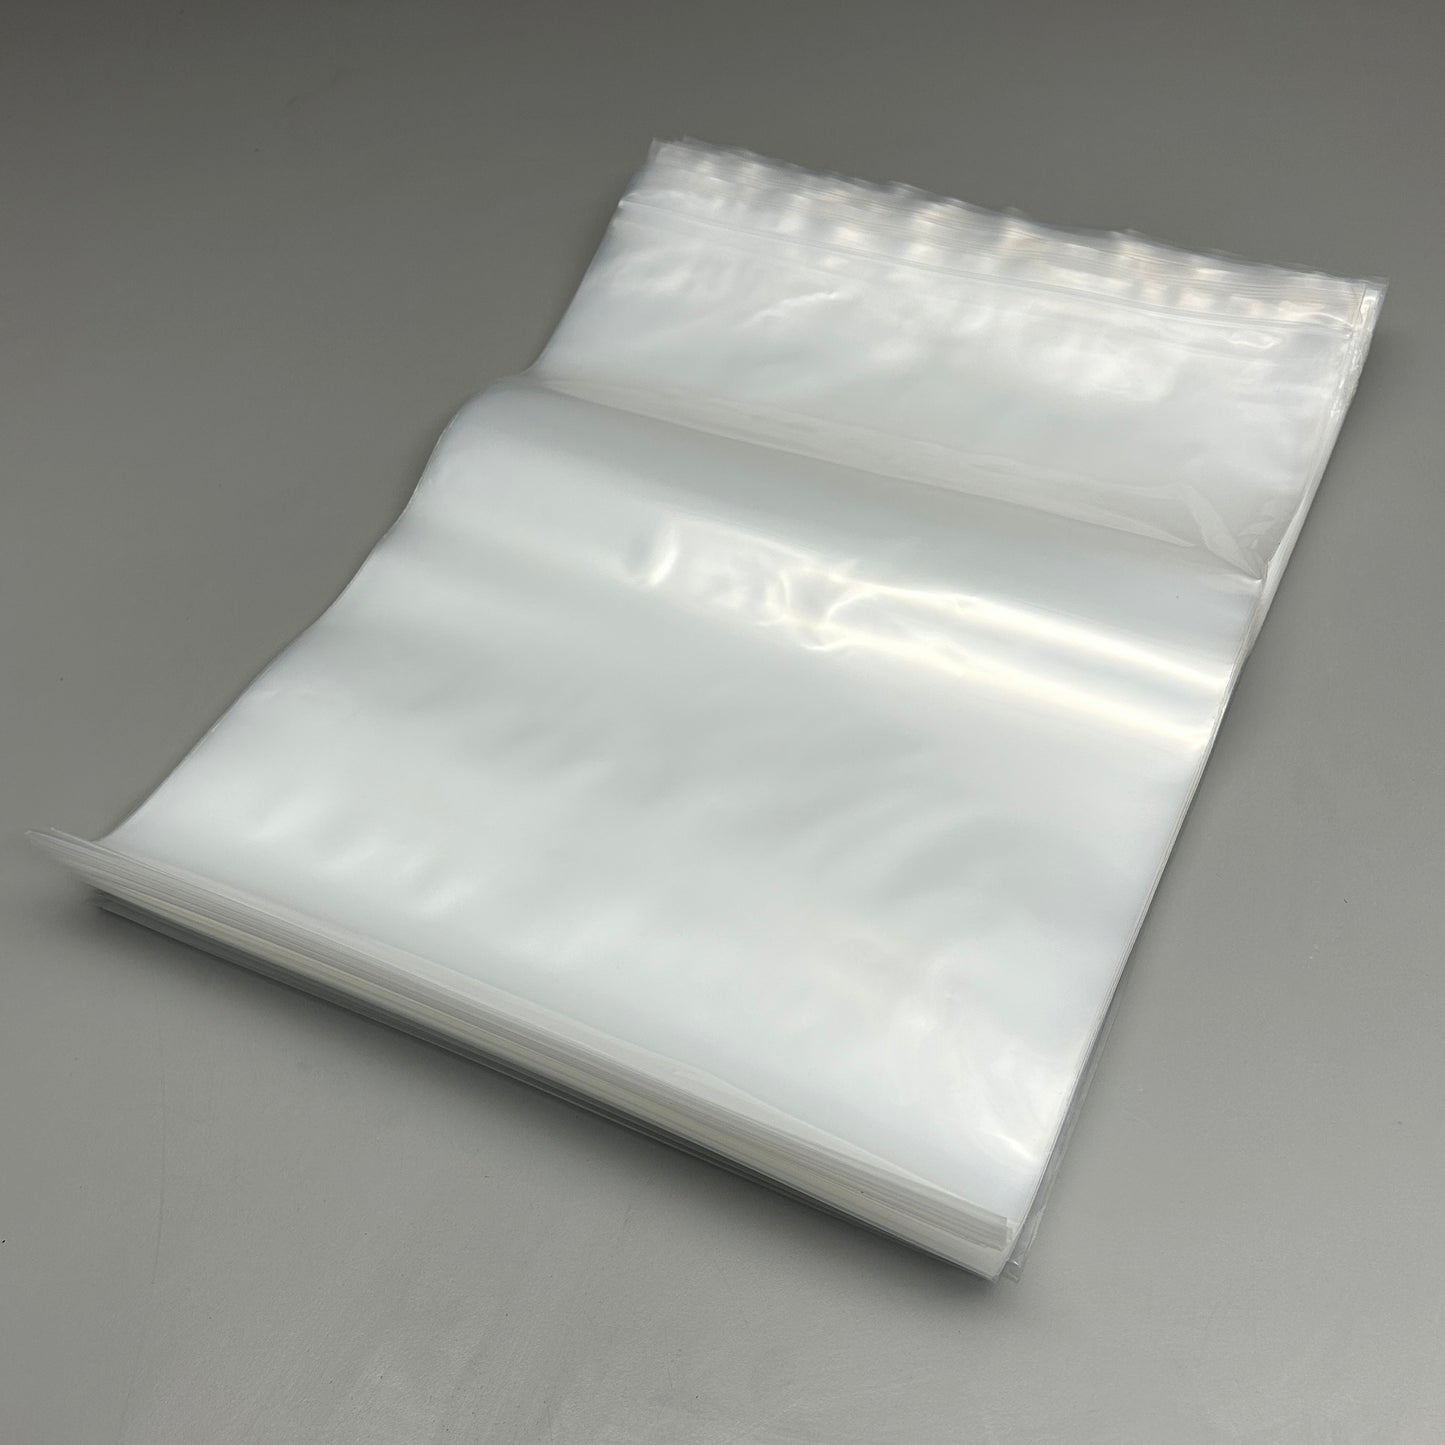 500 BAGS! (5x100ct) GGS 2 GALLON Standard Weight Seal Top Freezer Bags (Approx 13”x15”)